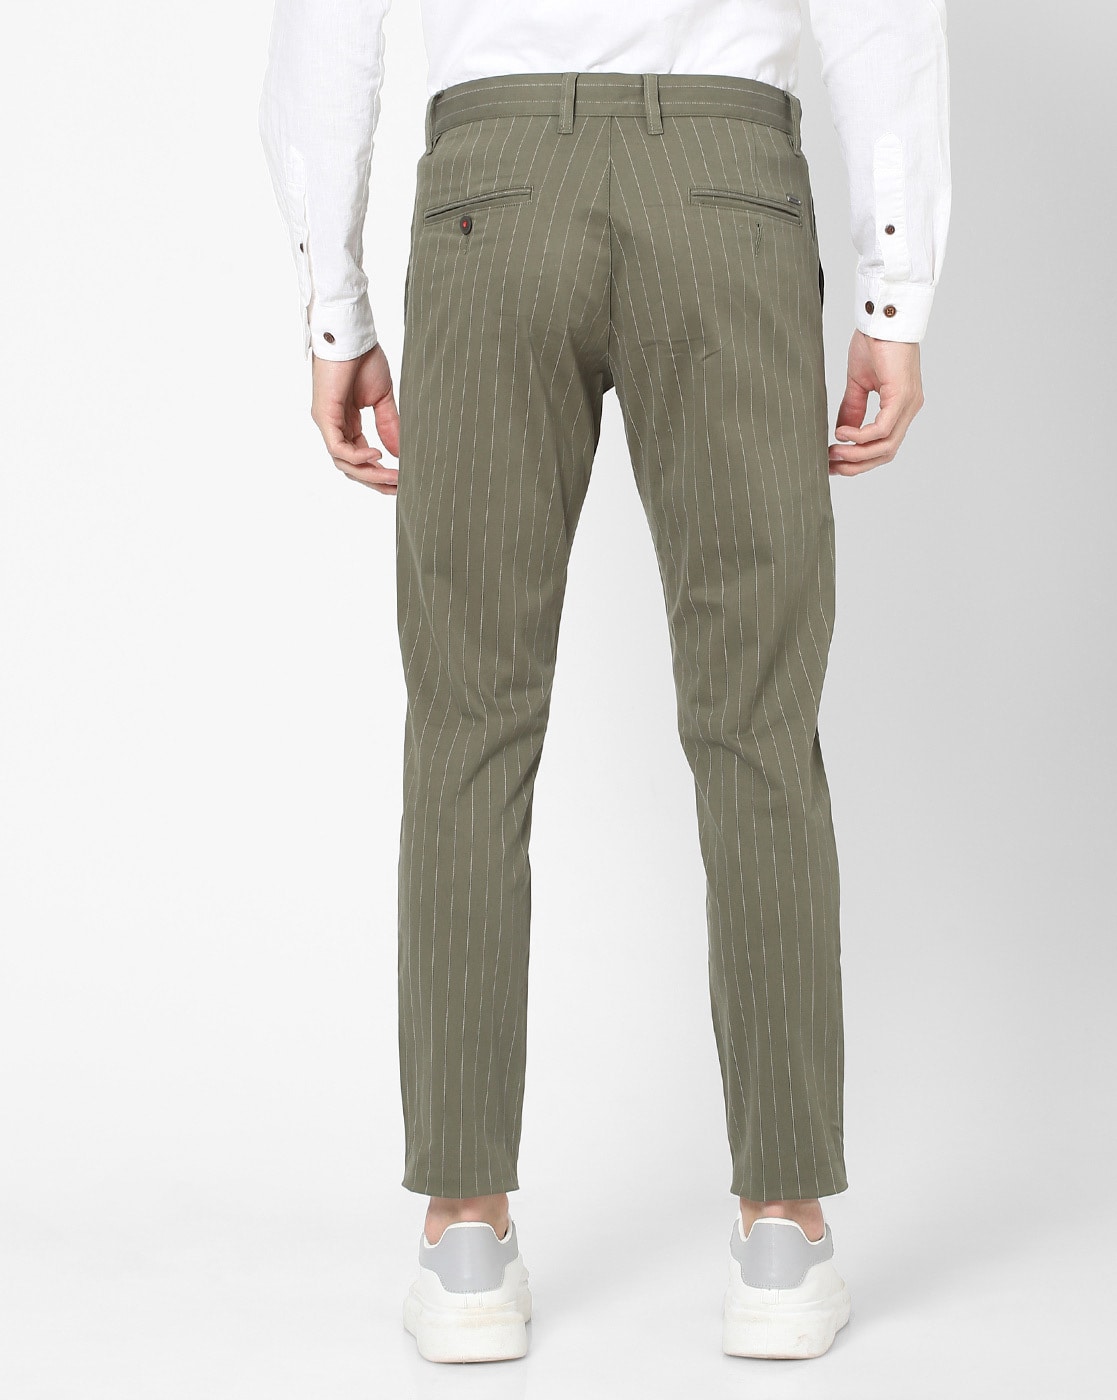 Mens Striped Slim Fit Dress Pants For Formal Business And Casual Wear In  Spring/Summer Ankle Length Striped Trousers Mens For Men Sizes 29 35 Style  210527 From Dou04, $29.84 | DHgate.Com